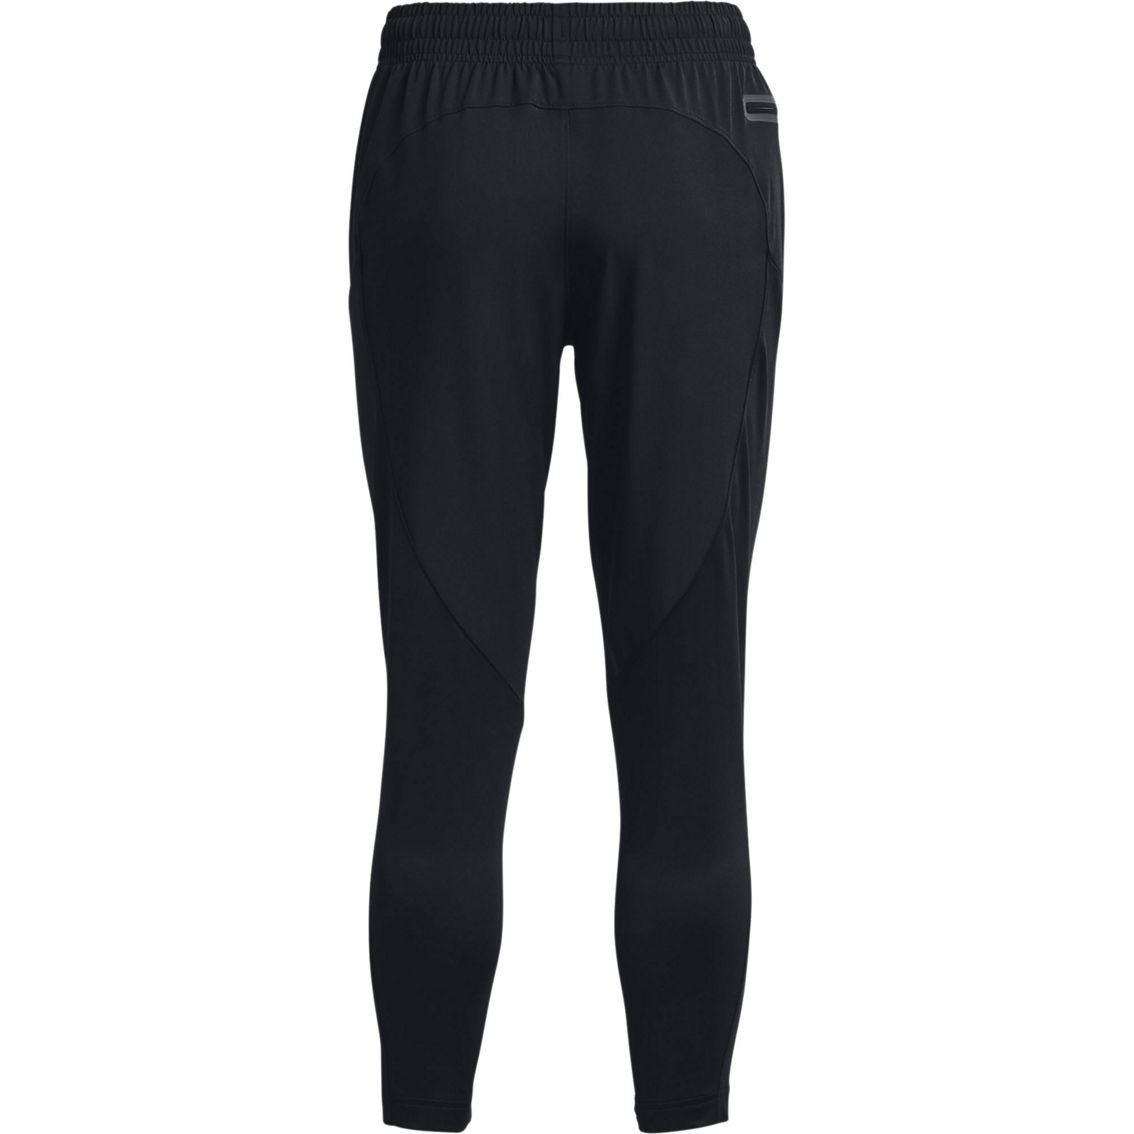 Under Armour Unstoppable Hybrid Pants - Image 8 of 8